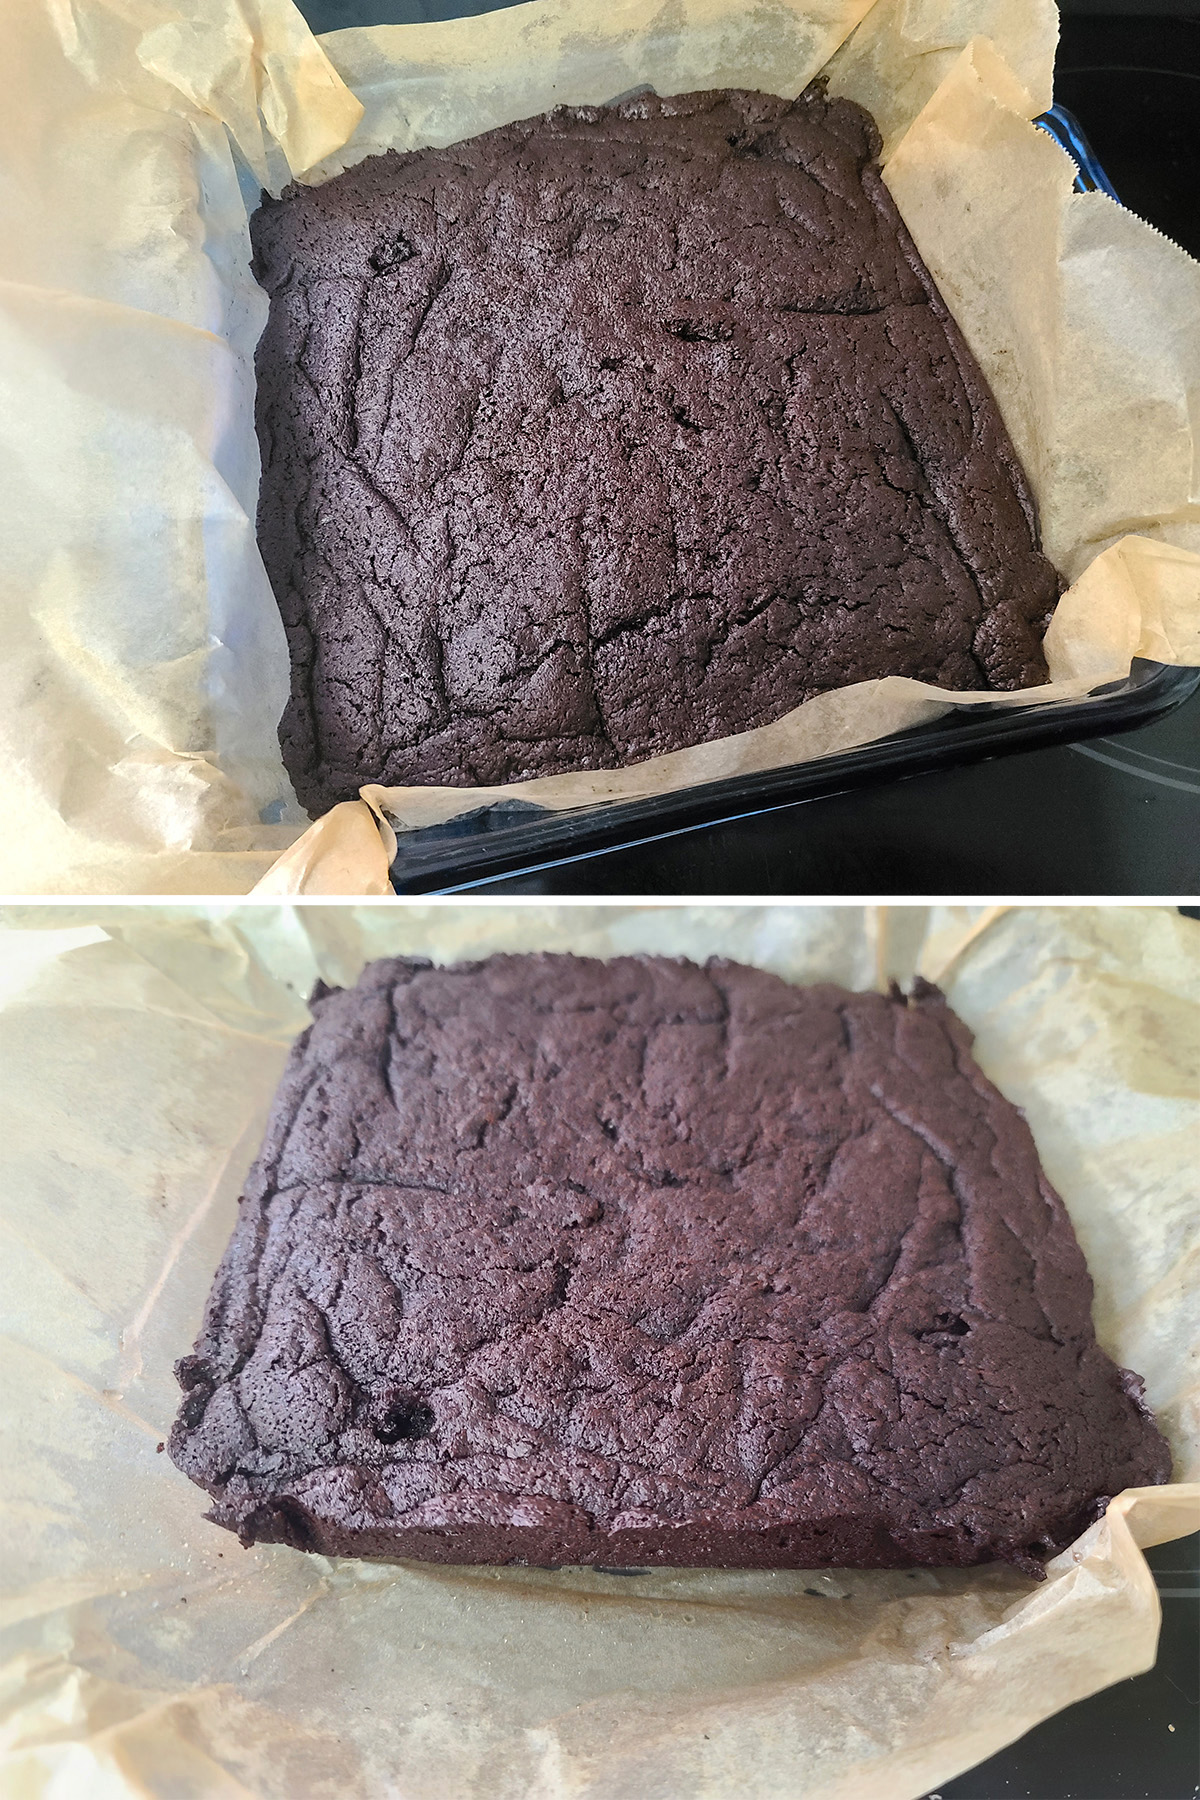 The baked brownie slab, in the pan and removed from the pan.